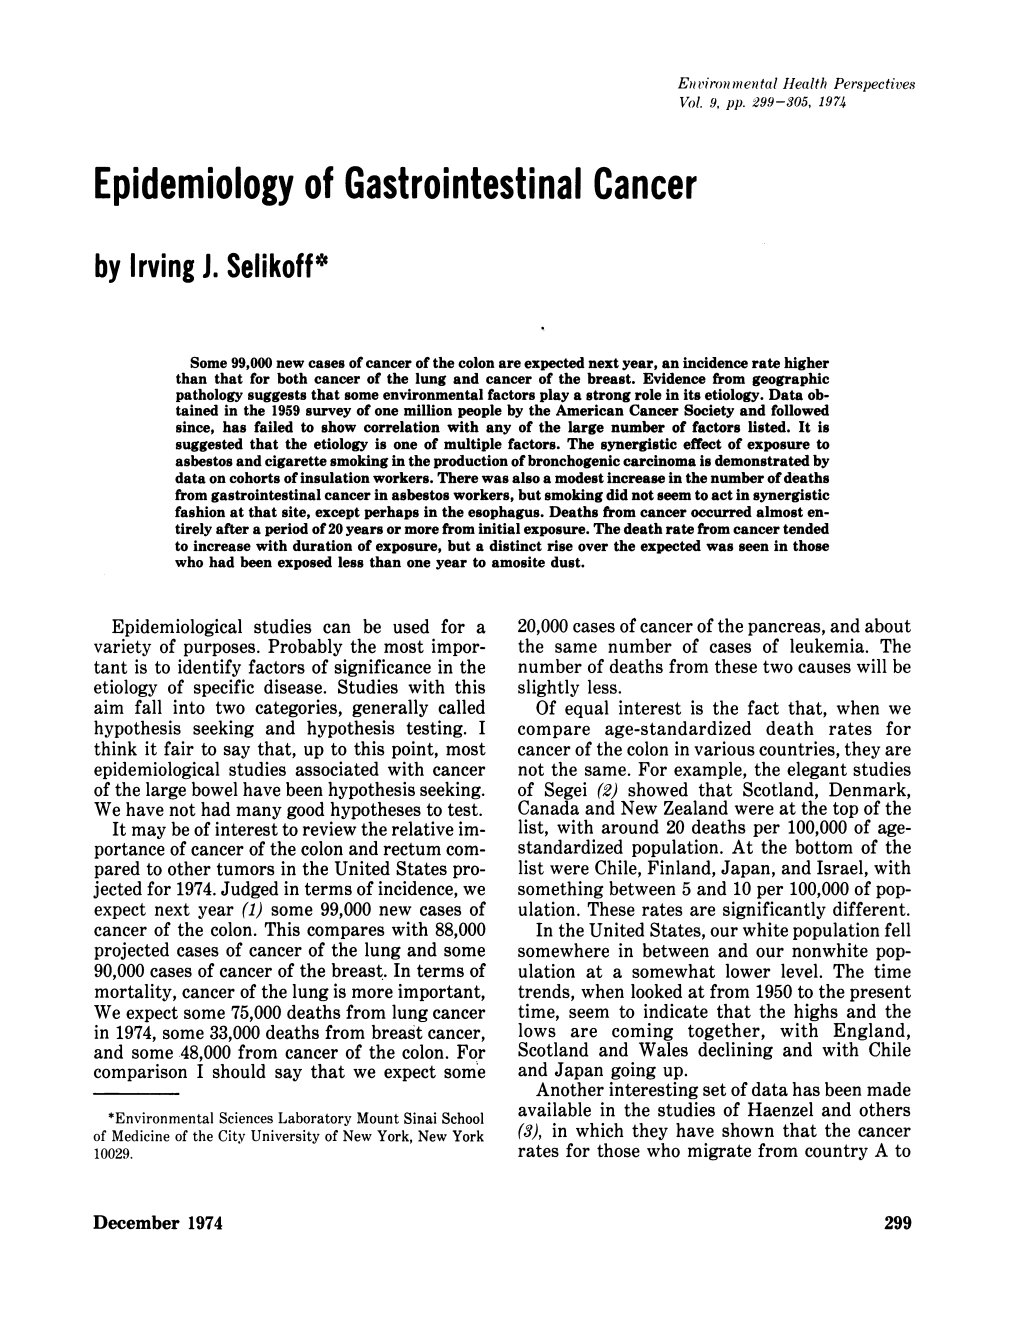 Epidemiology of Gastrointestinal Cancer by Irving J